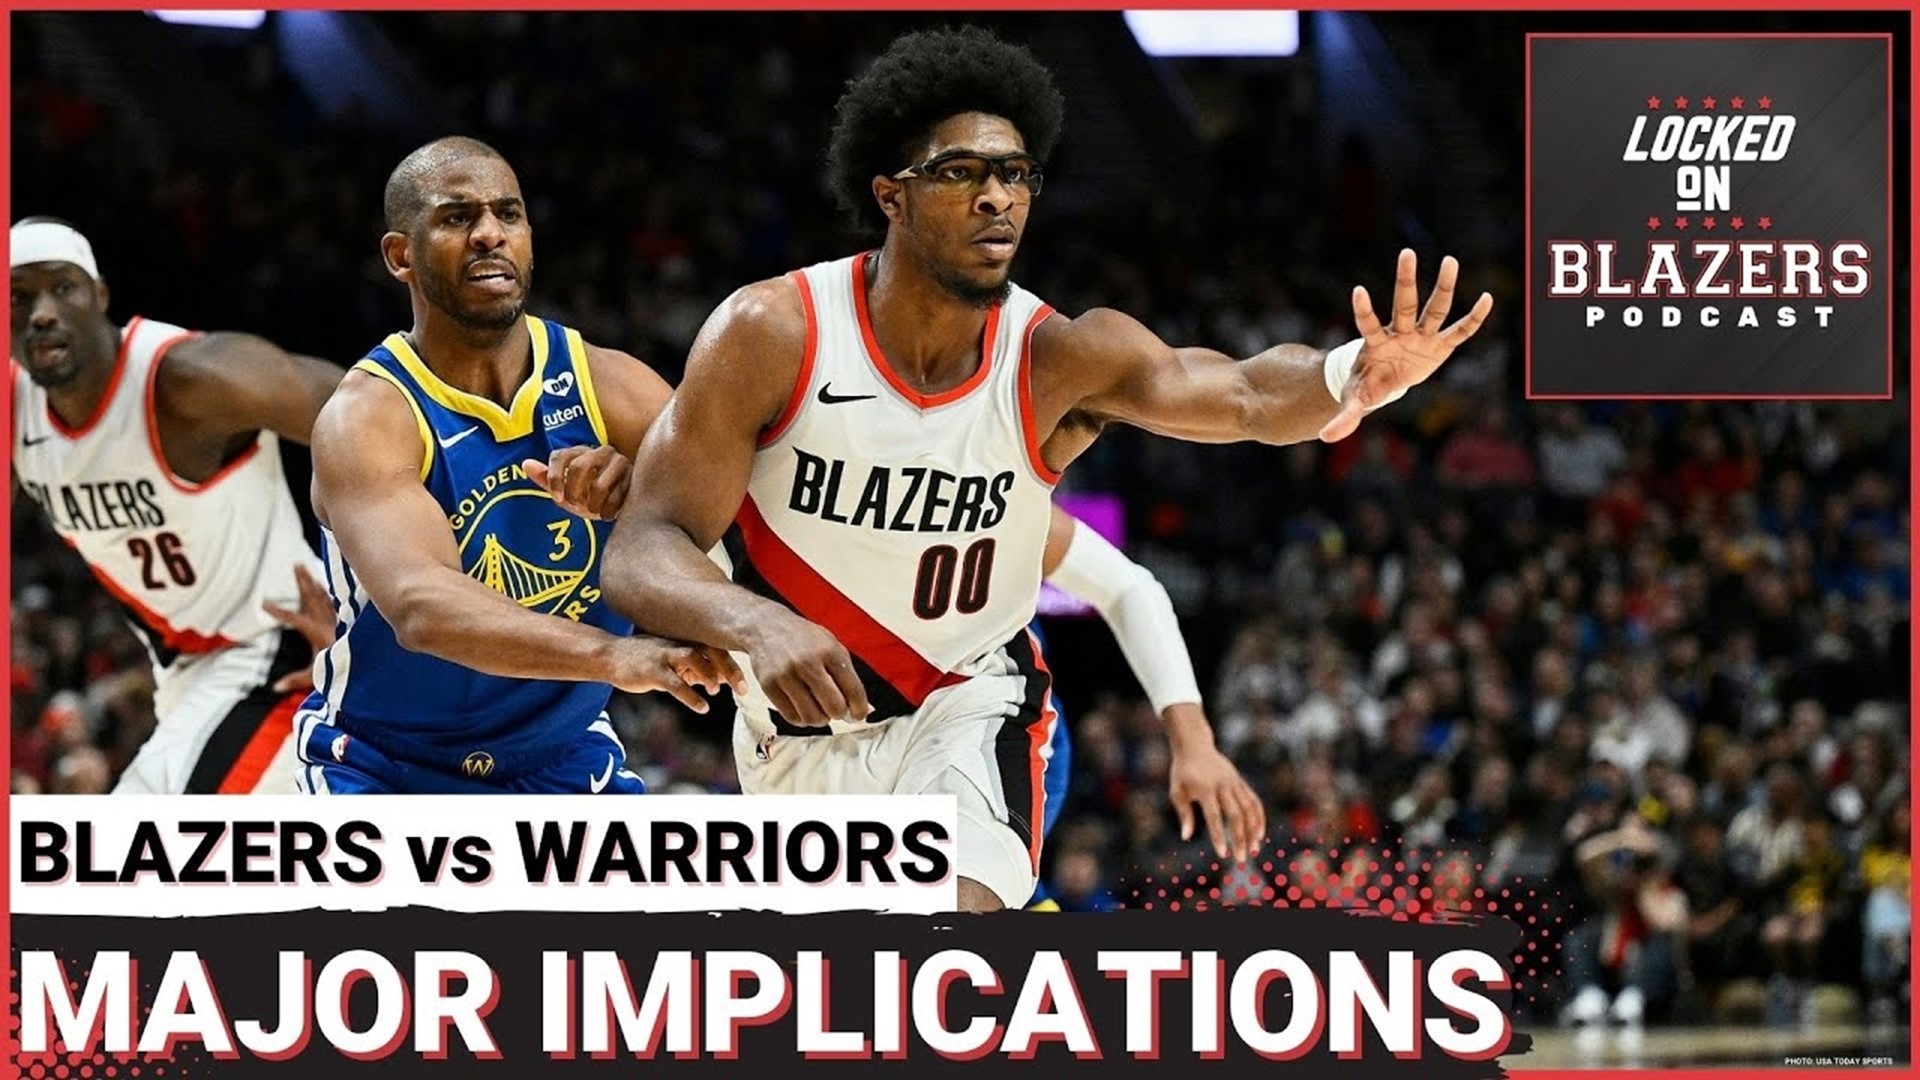 Trail Blazers Lose To Warriors in a game with Serious Playoff and Draft Lottery Implications